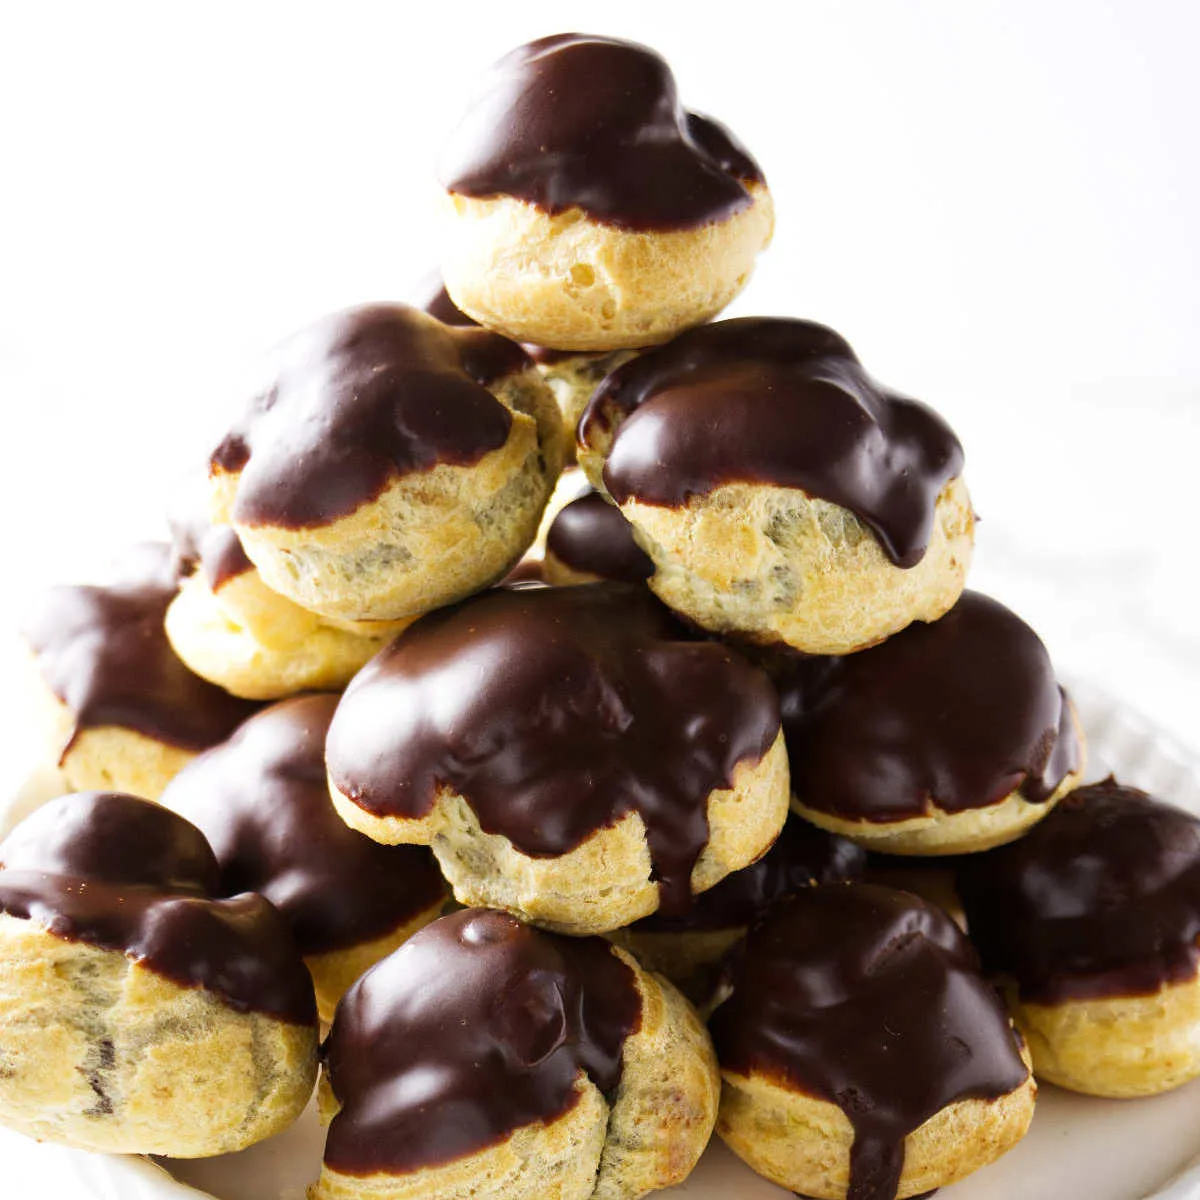 Cream puffs made from choux pastry.